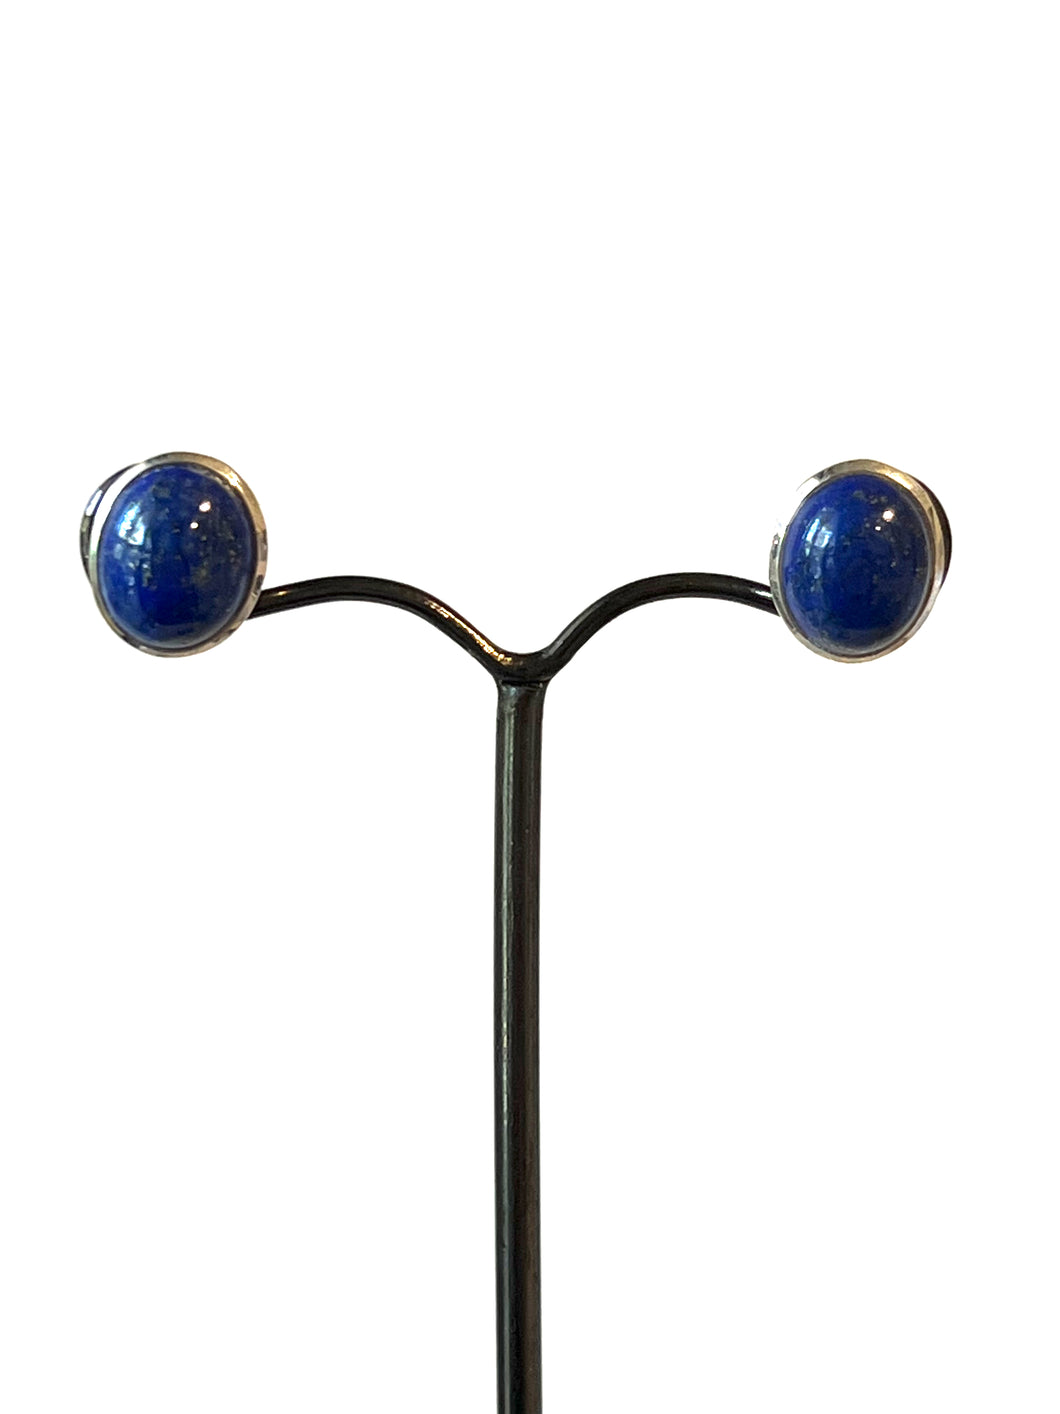 Blue Oval Stud Earrings with Lapis Lazuli Set in Sterling Silver